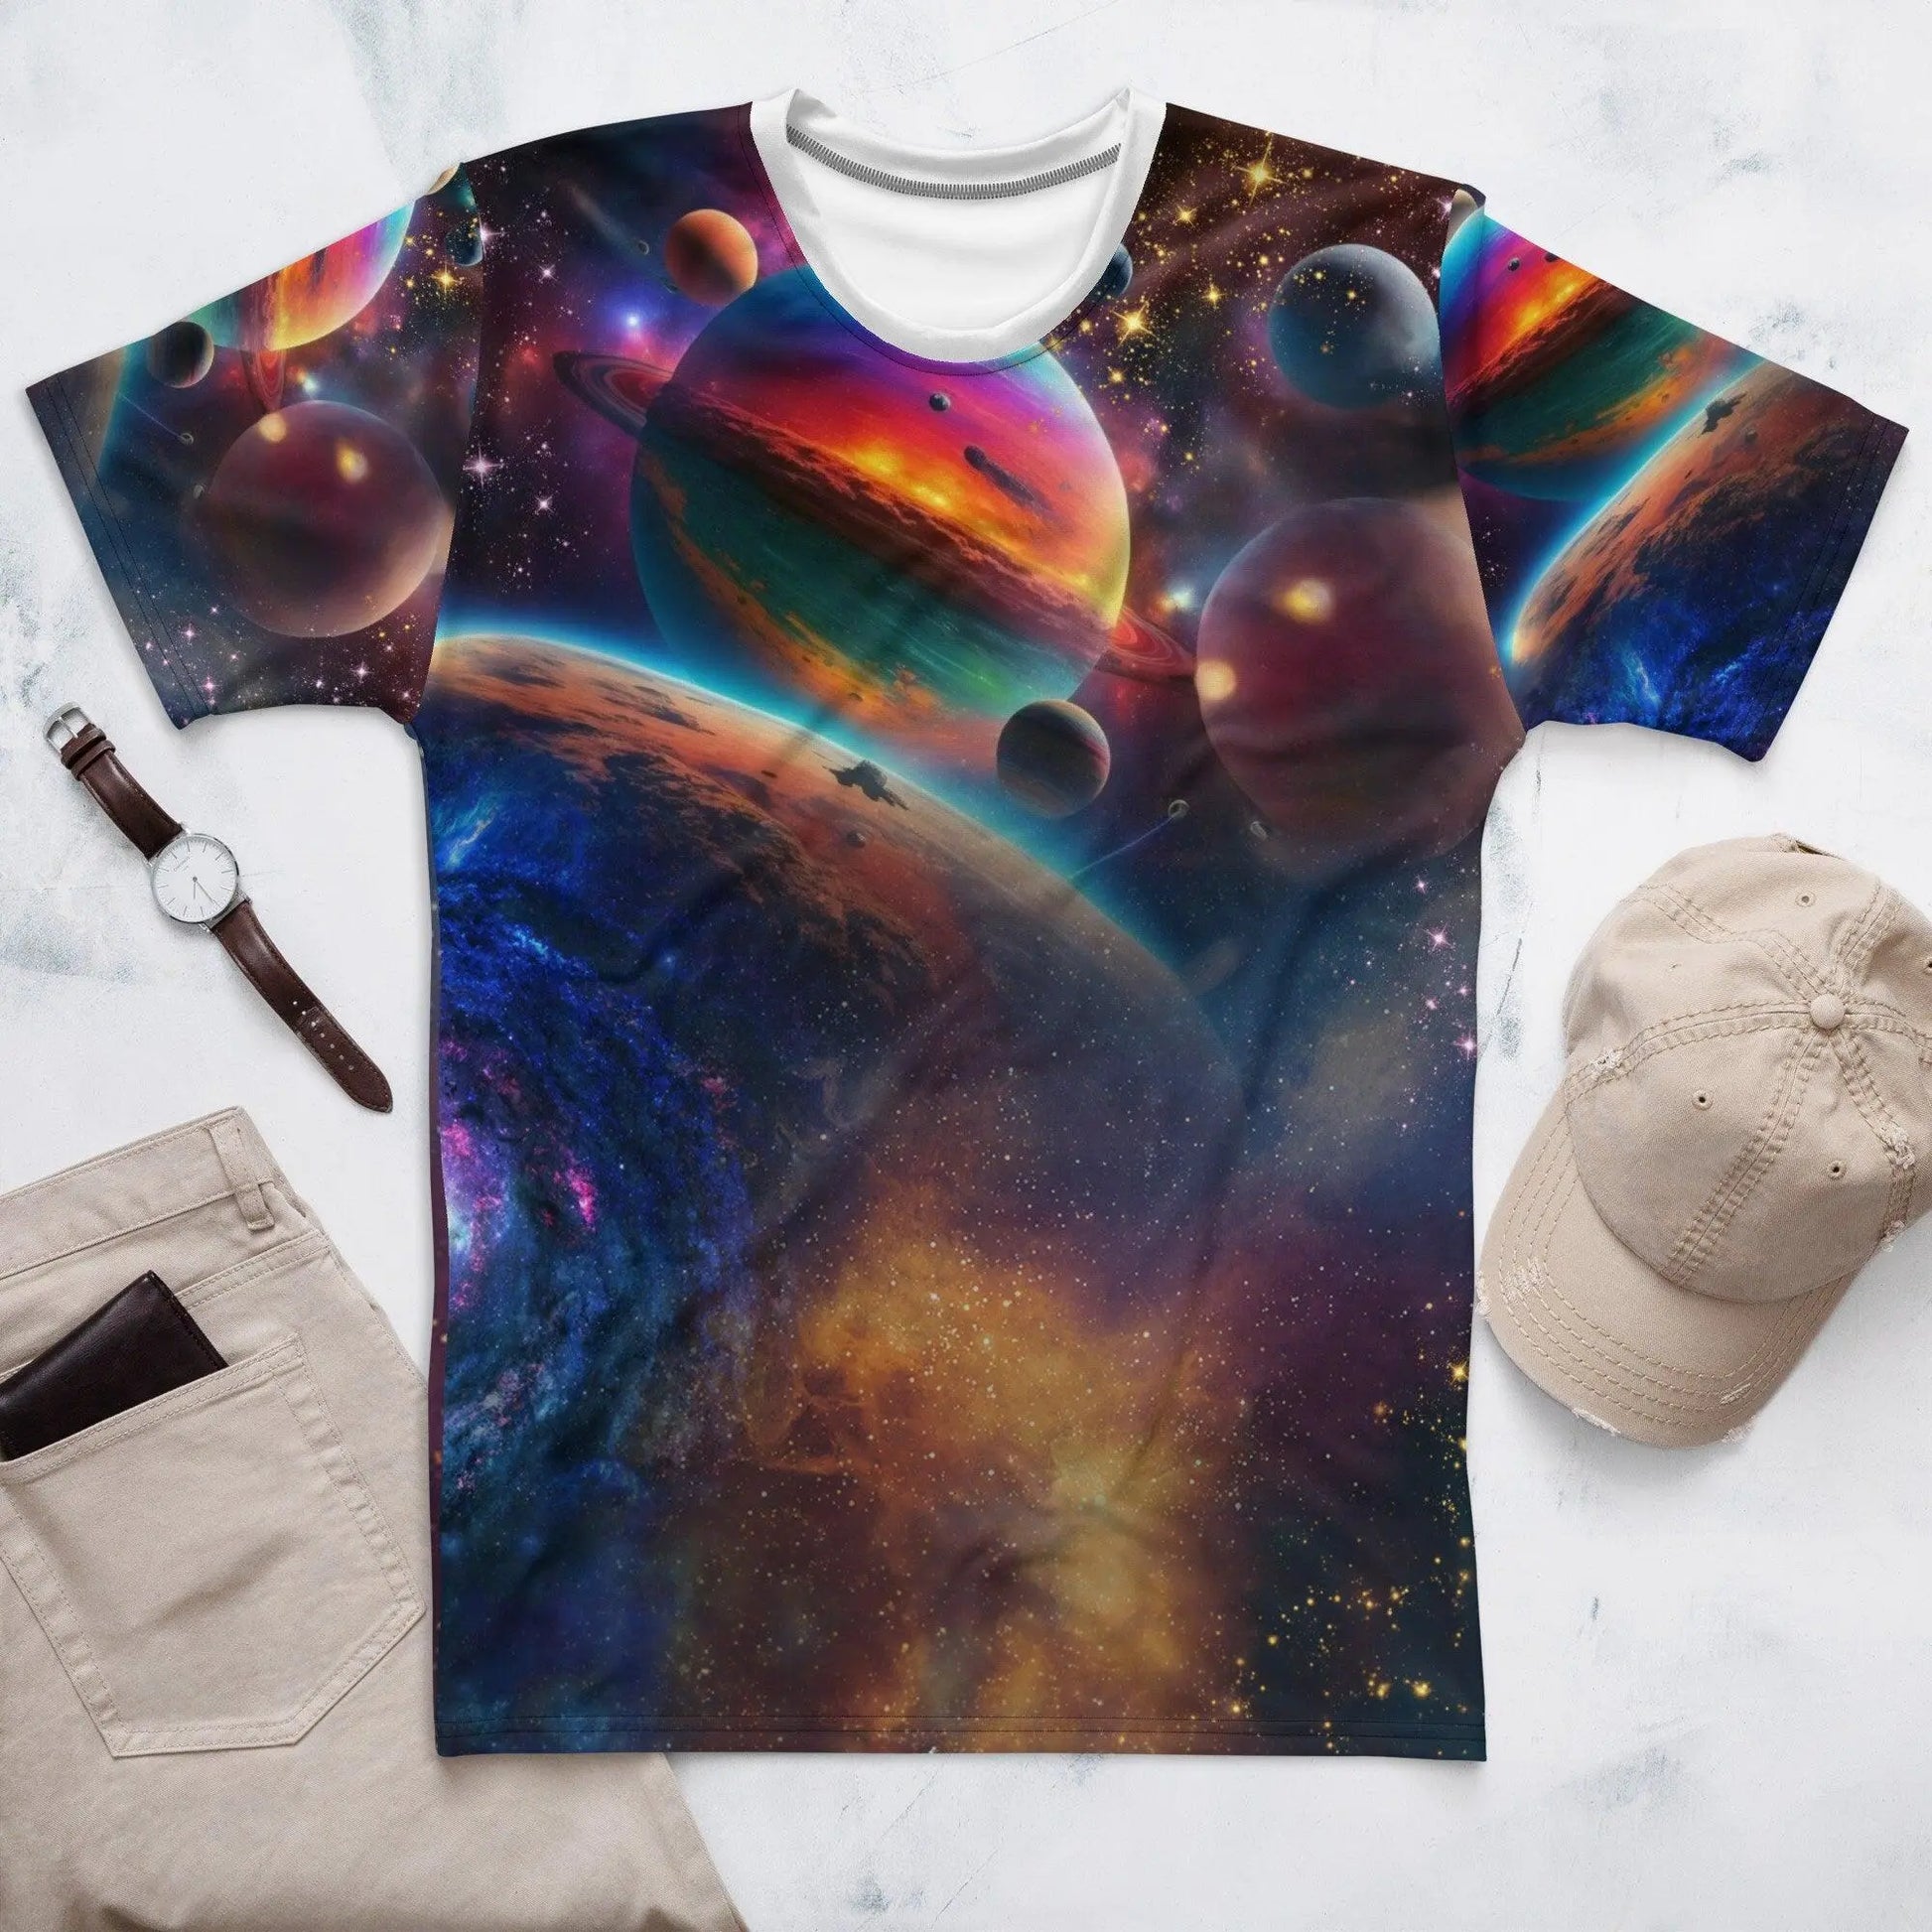 Interstellar Adventure Tee - Colorful Fantasy Realism Artwork - Save Our Planet & Journey to the Stars